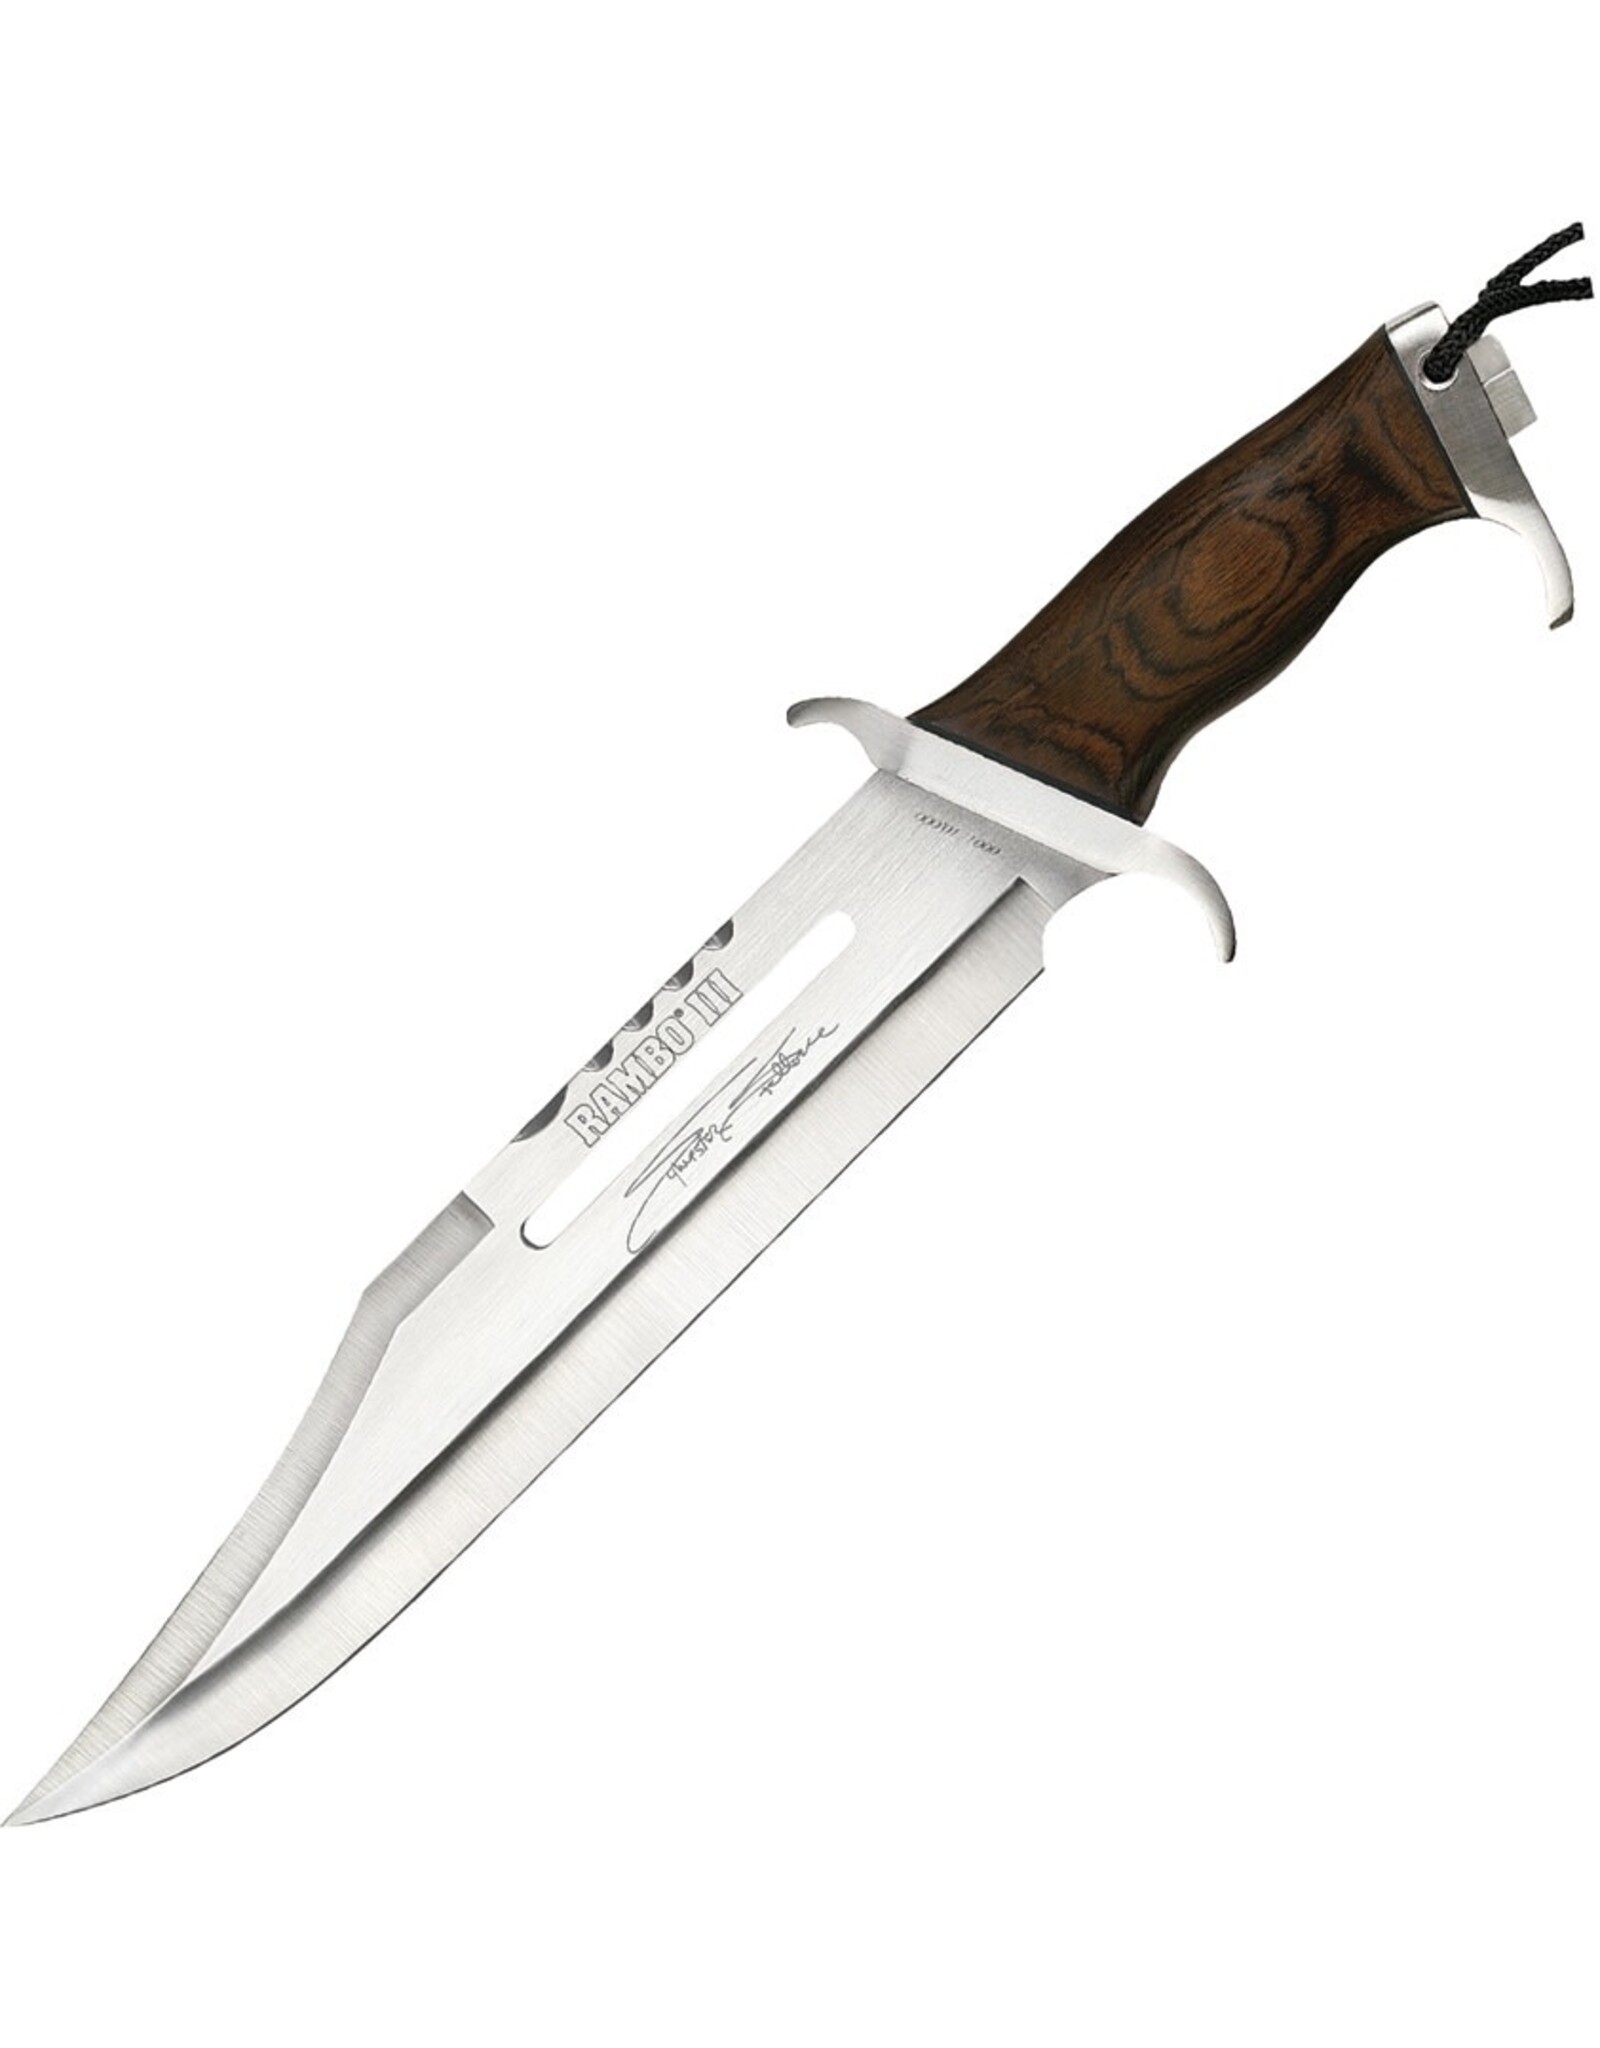 Hollywood Collectors Group Rambo III Sylvester Stallone Signature Edition 13" Blade, Hardwood Handle - 9297